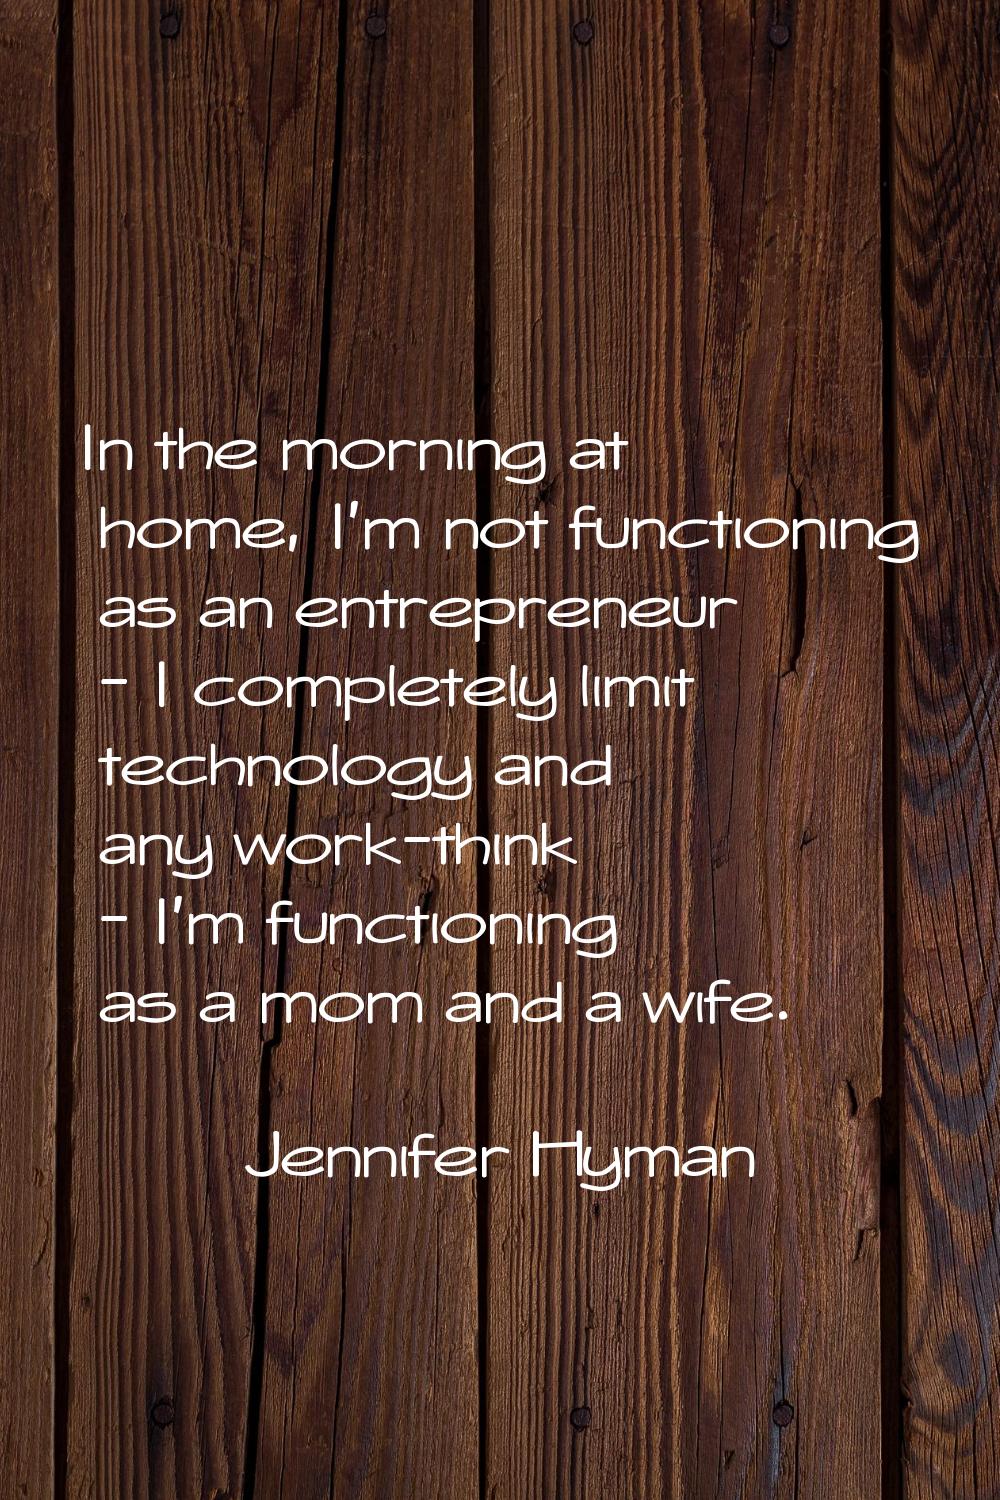 In the morning at home, I'm not functioning as an entrepreneur - I completely limit technology and 